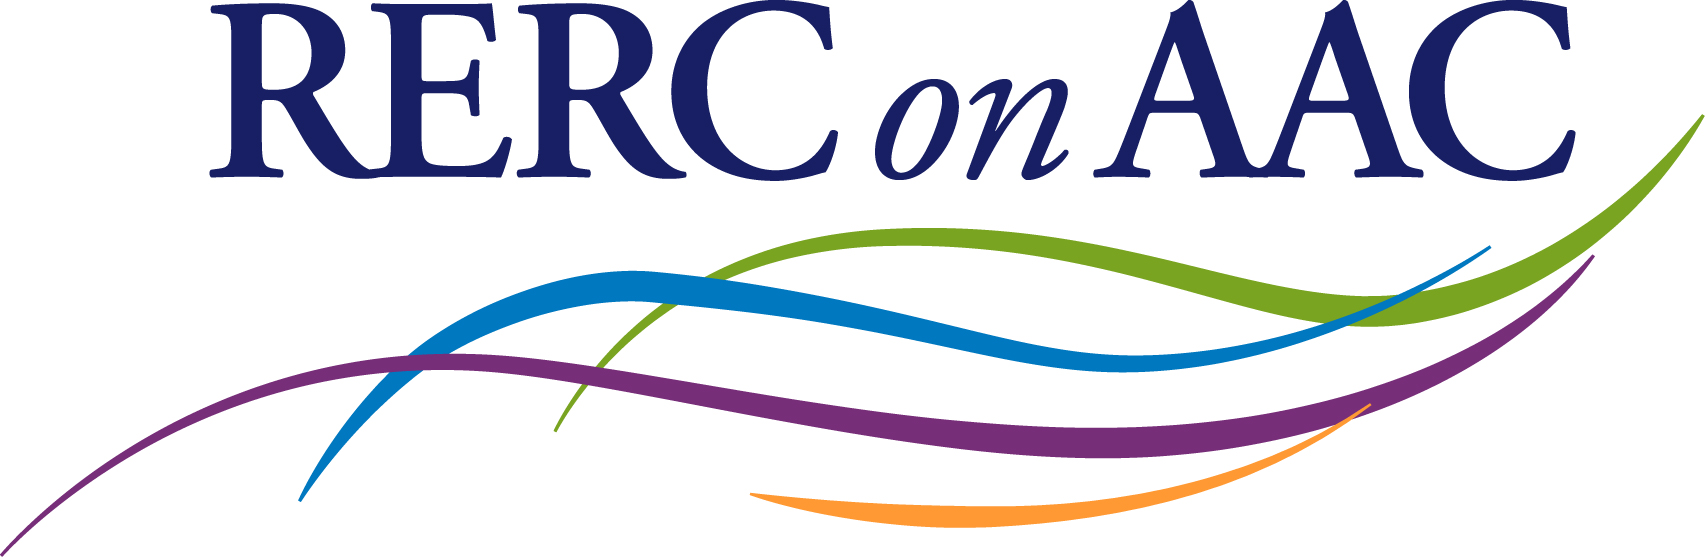 RERC on AAC color logo